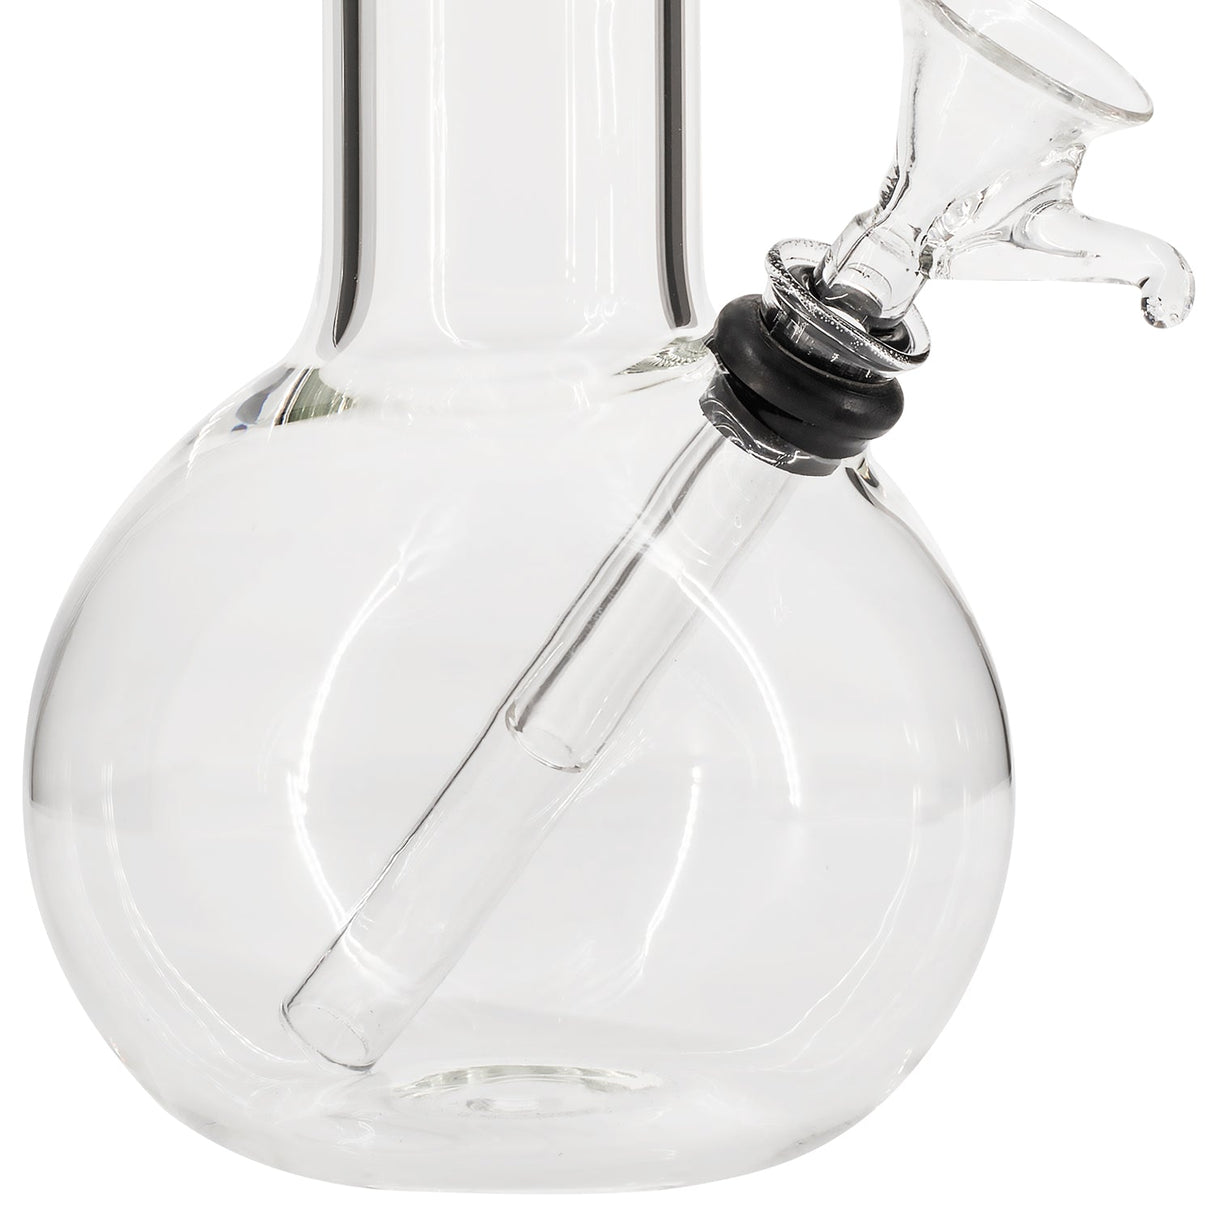 LA Pipes Clear Glass Basic Water Pipe - Bubble Design, 8" Compact Size, Side View